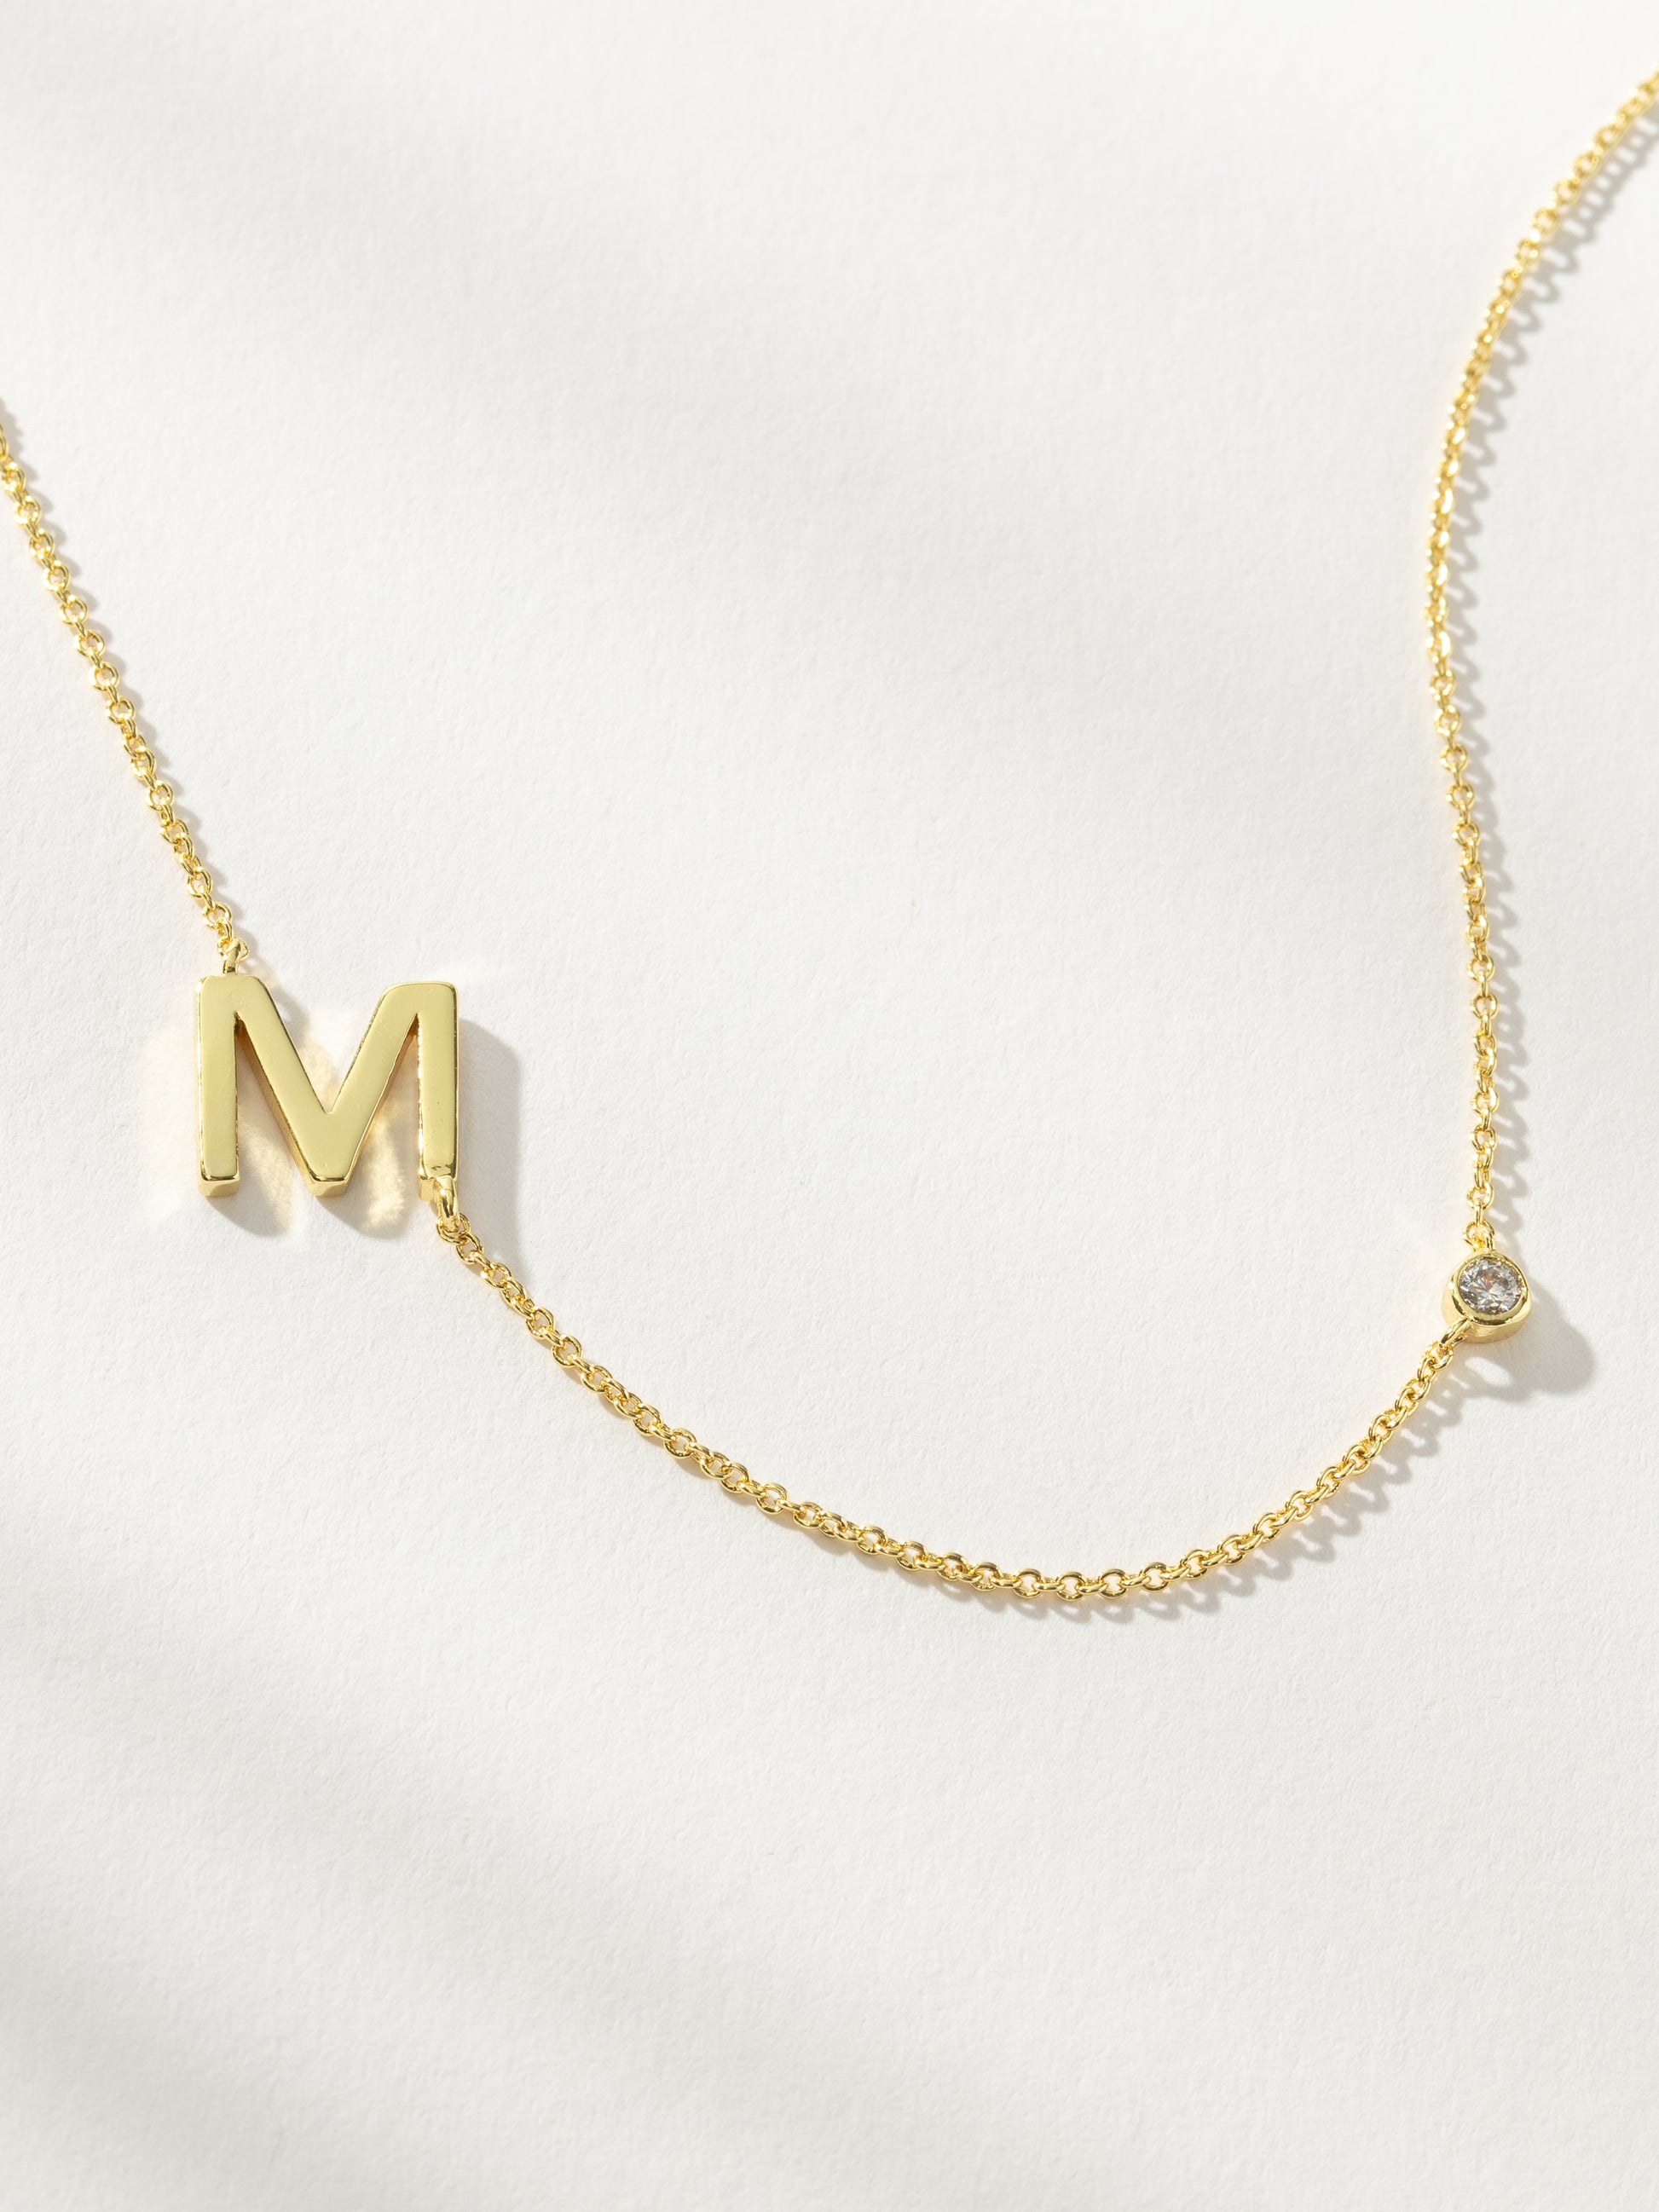 Personalized Touch Necklace | Gold M | Product Image | Uncommon James